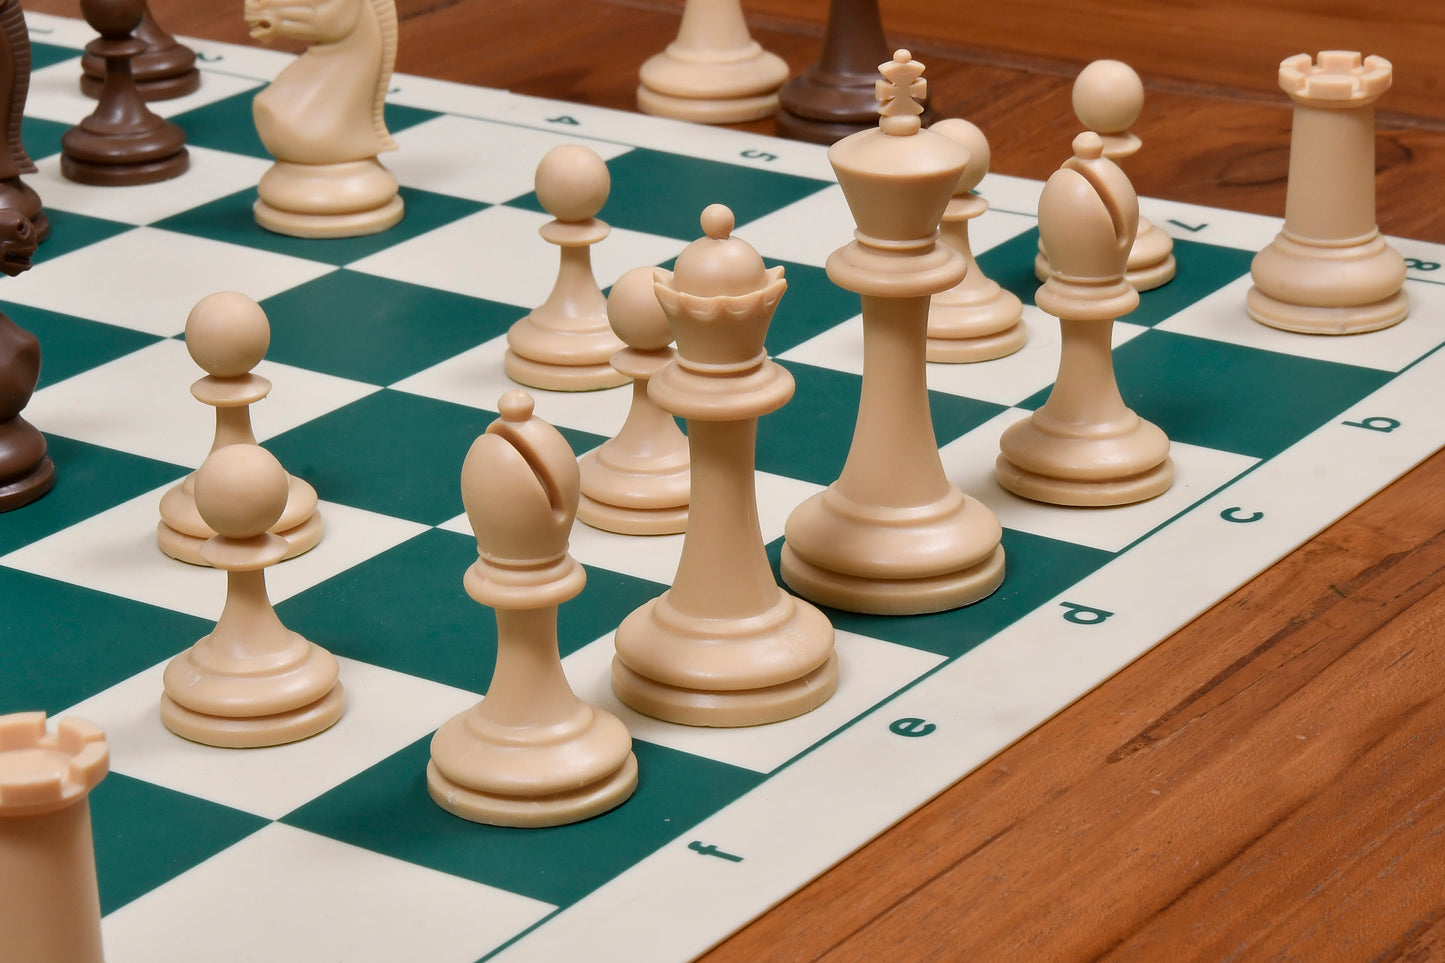 The Blitz Series Plastic Chess Pieces Dyed in Sandalwood and Chocolate Brown - 3.8" King